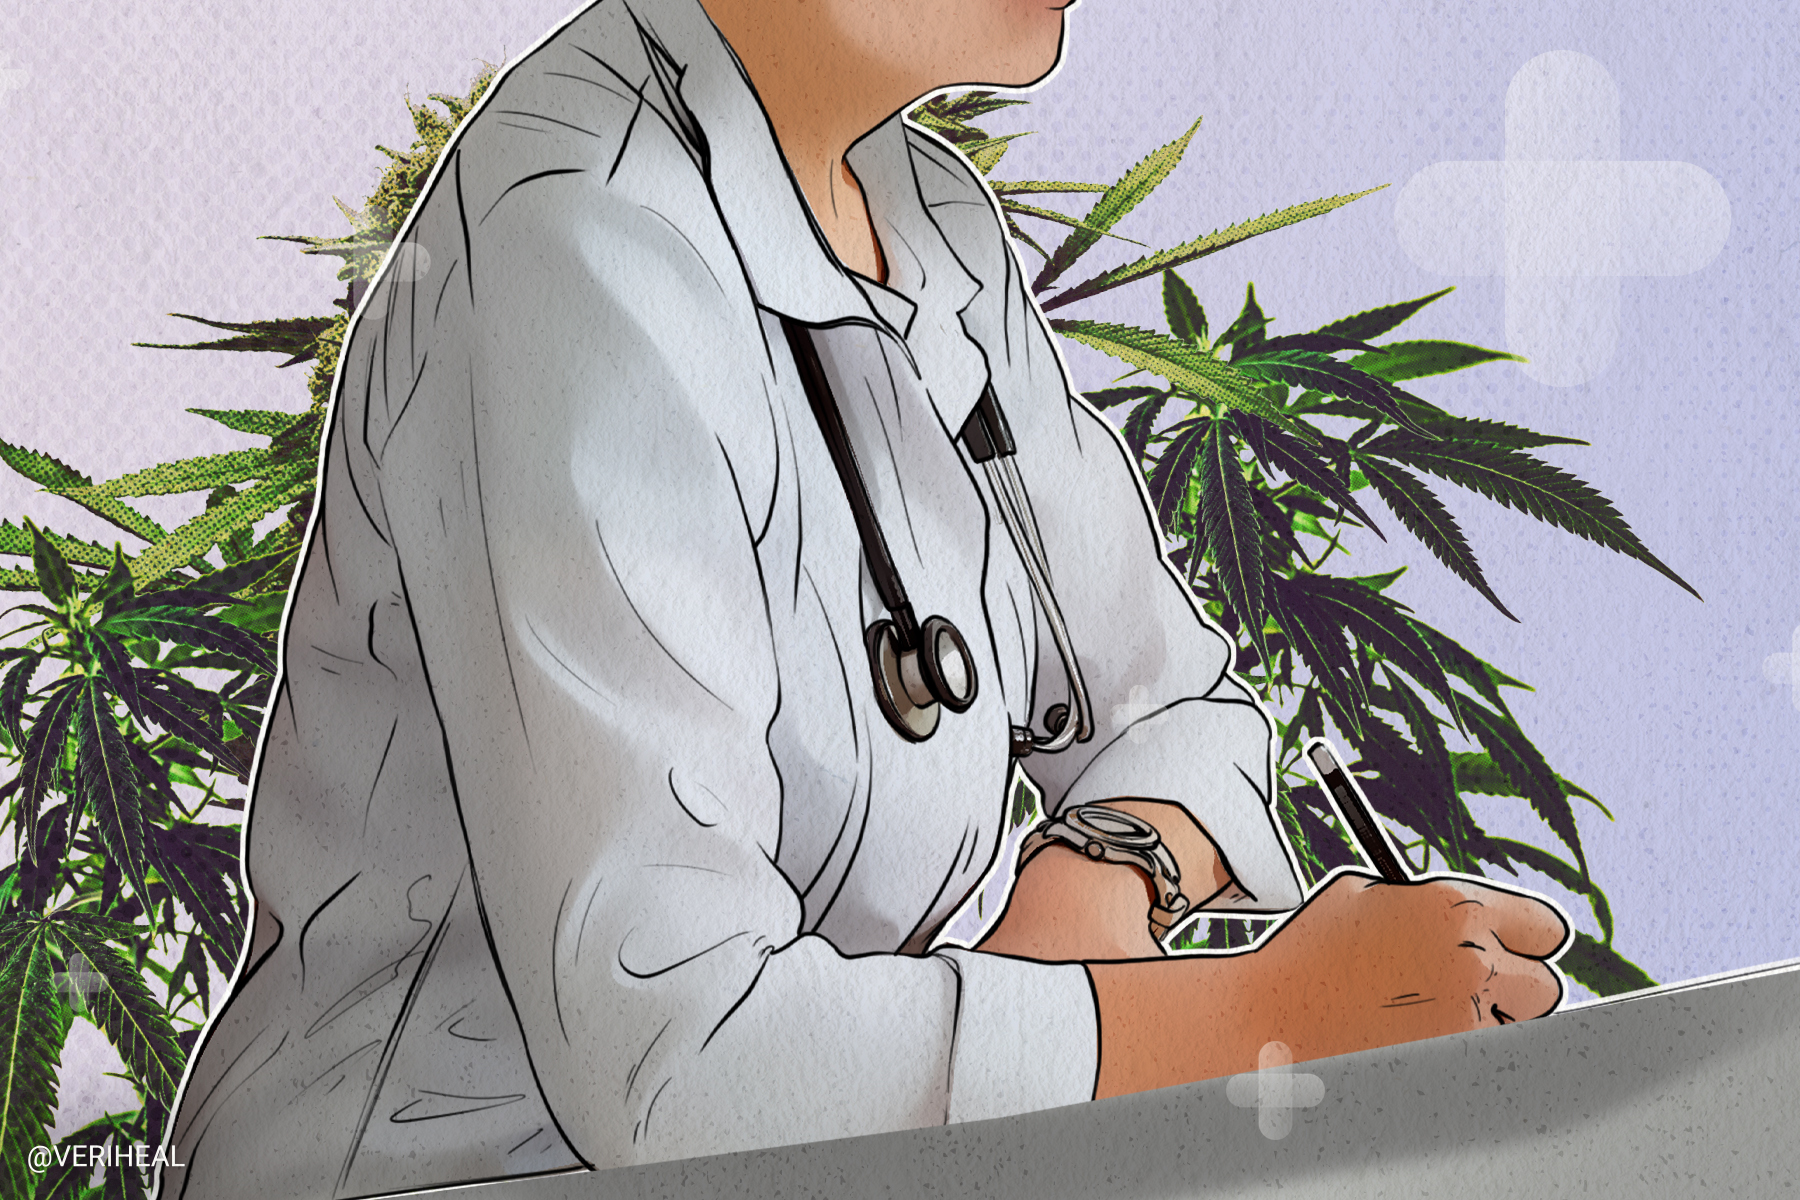 New U.S. Research Efforts Could Catalyze Medical Cannabis’ Adoption in the Pharmaceutical Industry